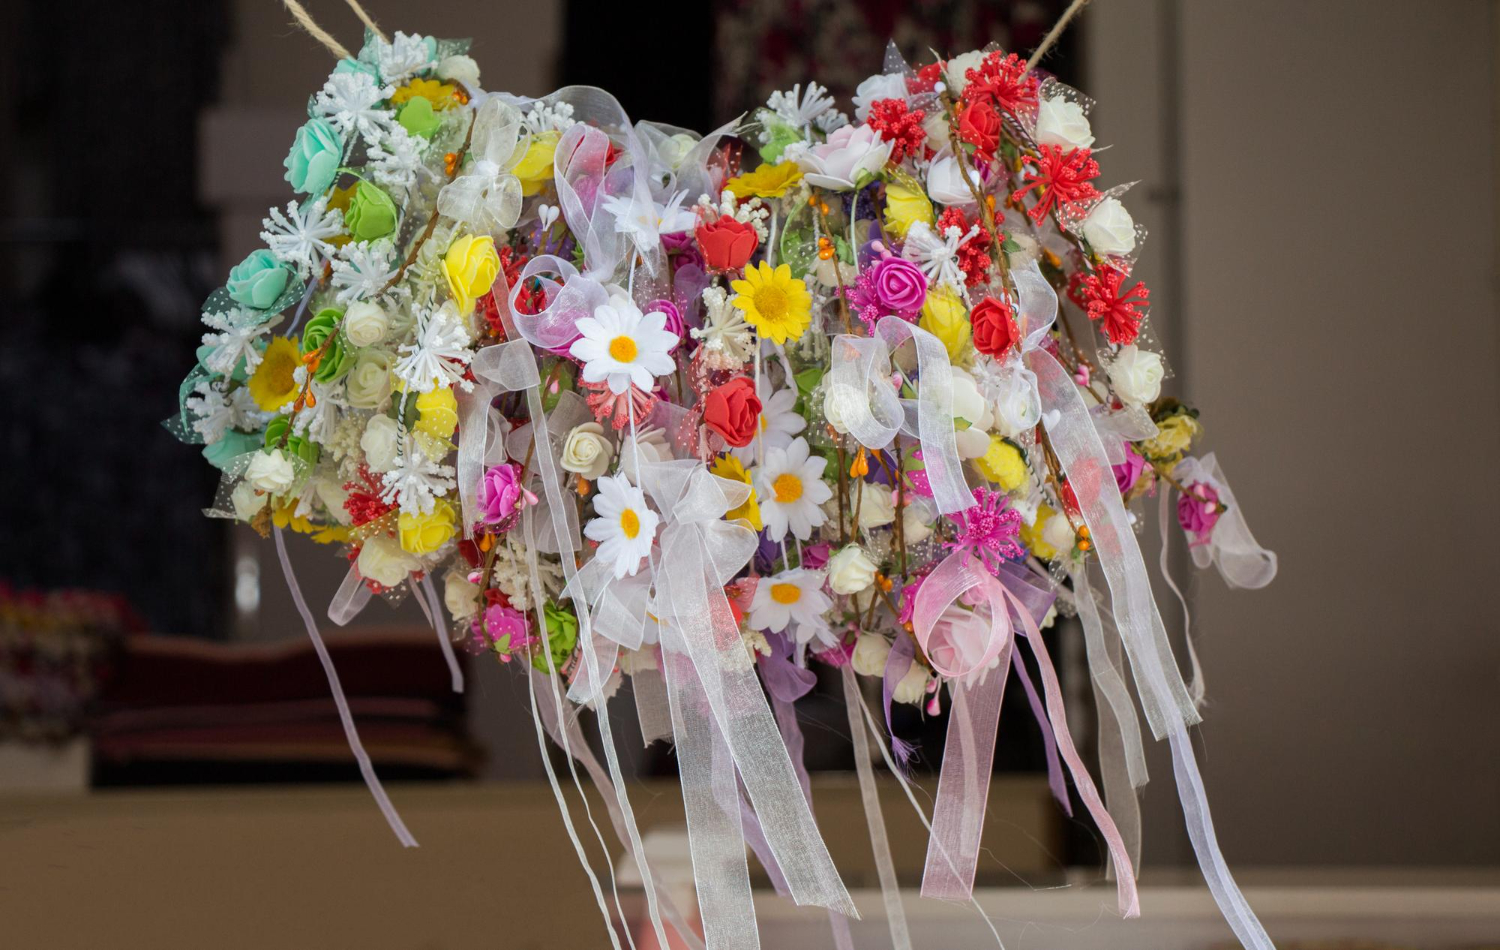 olorful crowns made of fake flowers